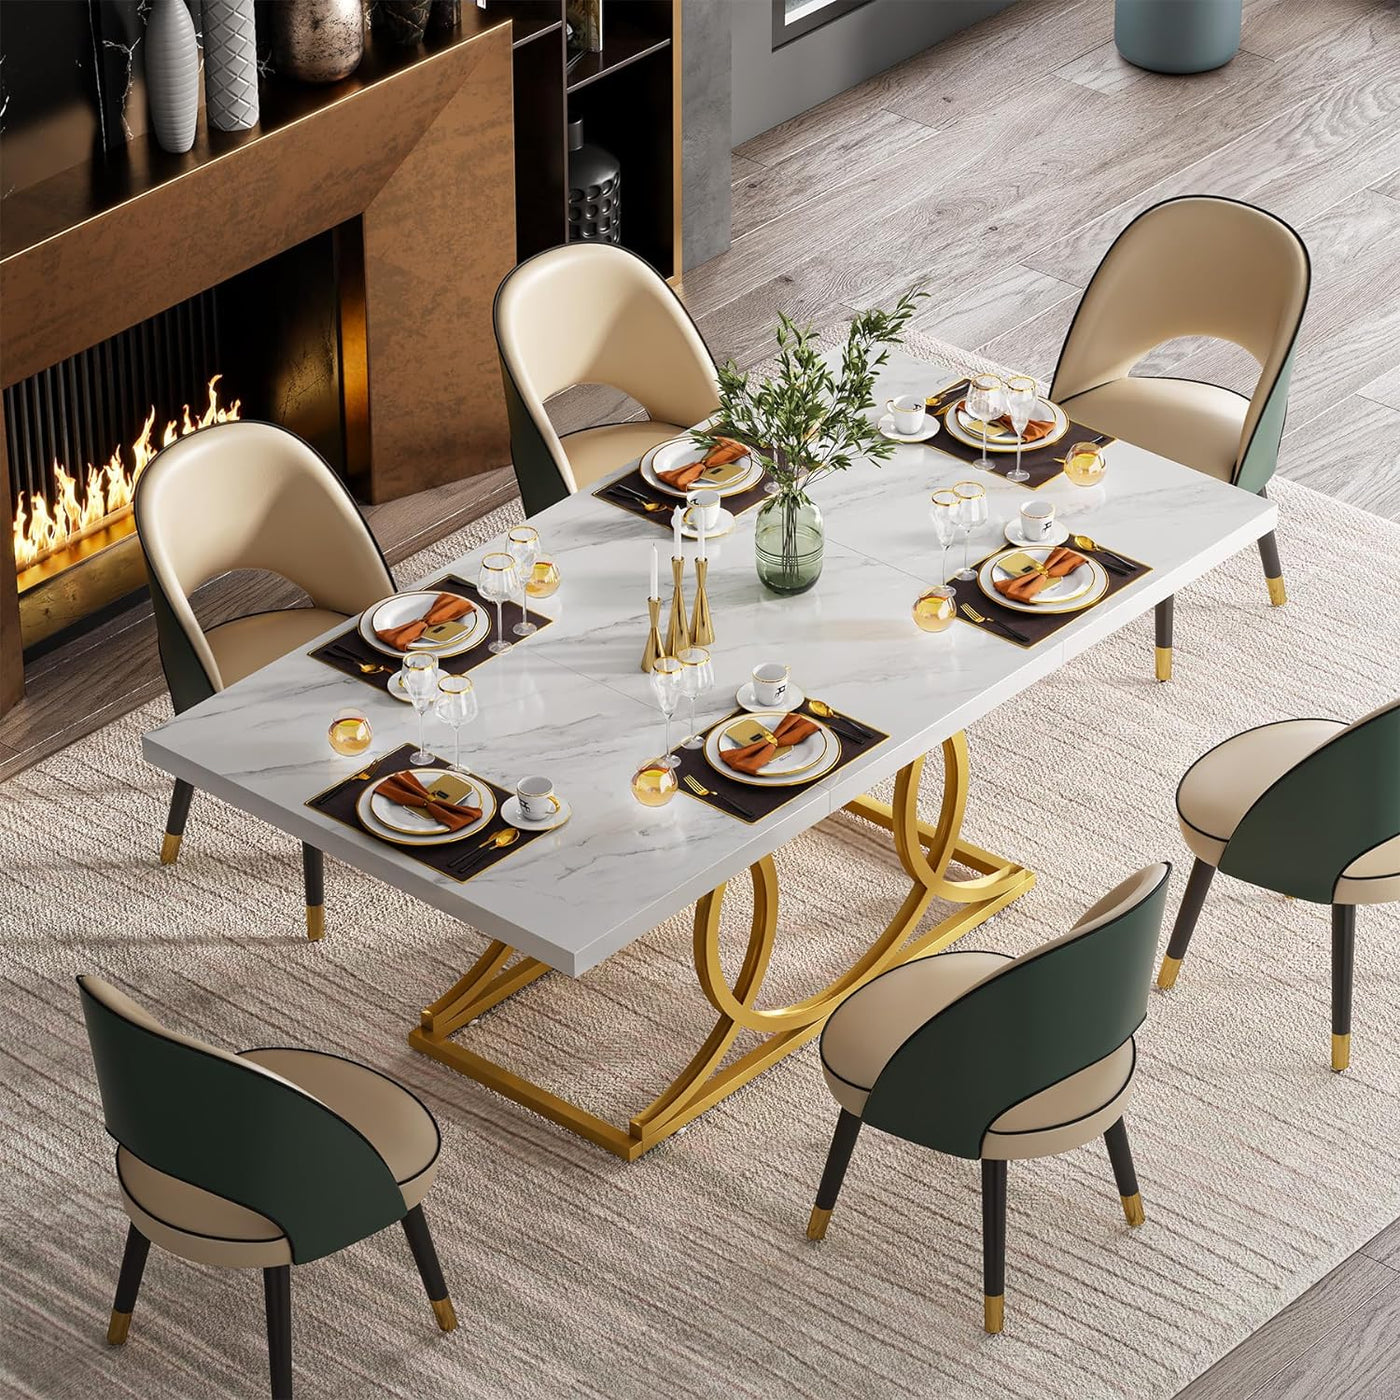 TIYASE Modern Dining Table for 6-8 People, 63 inch White Dining Room Table - $120